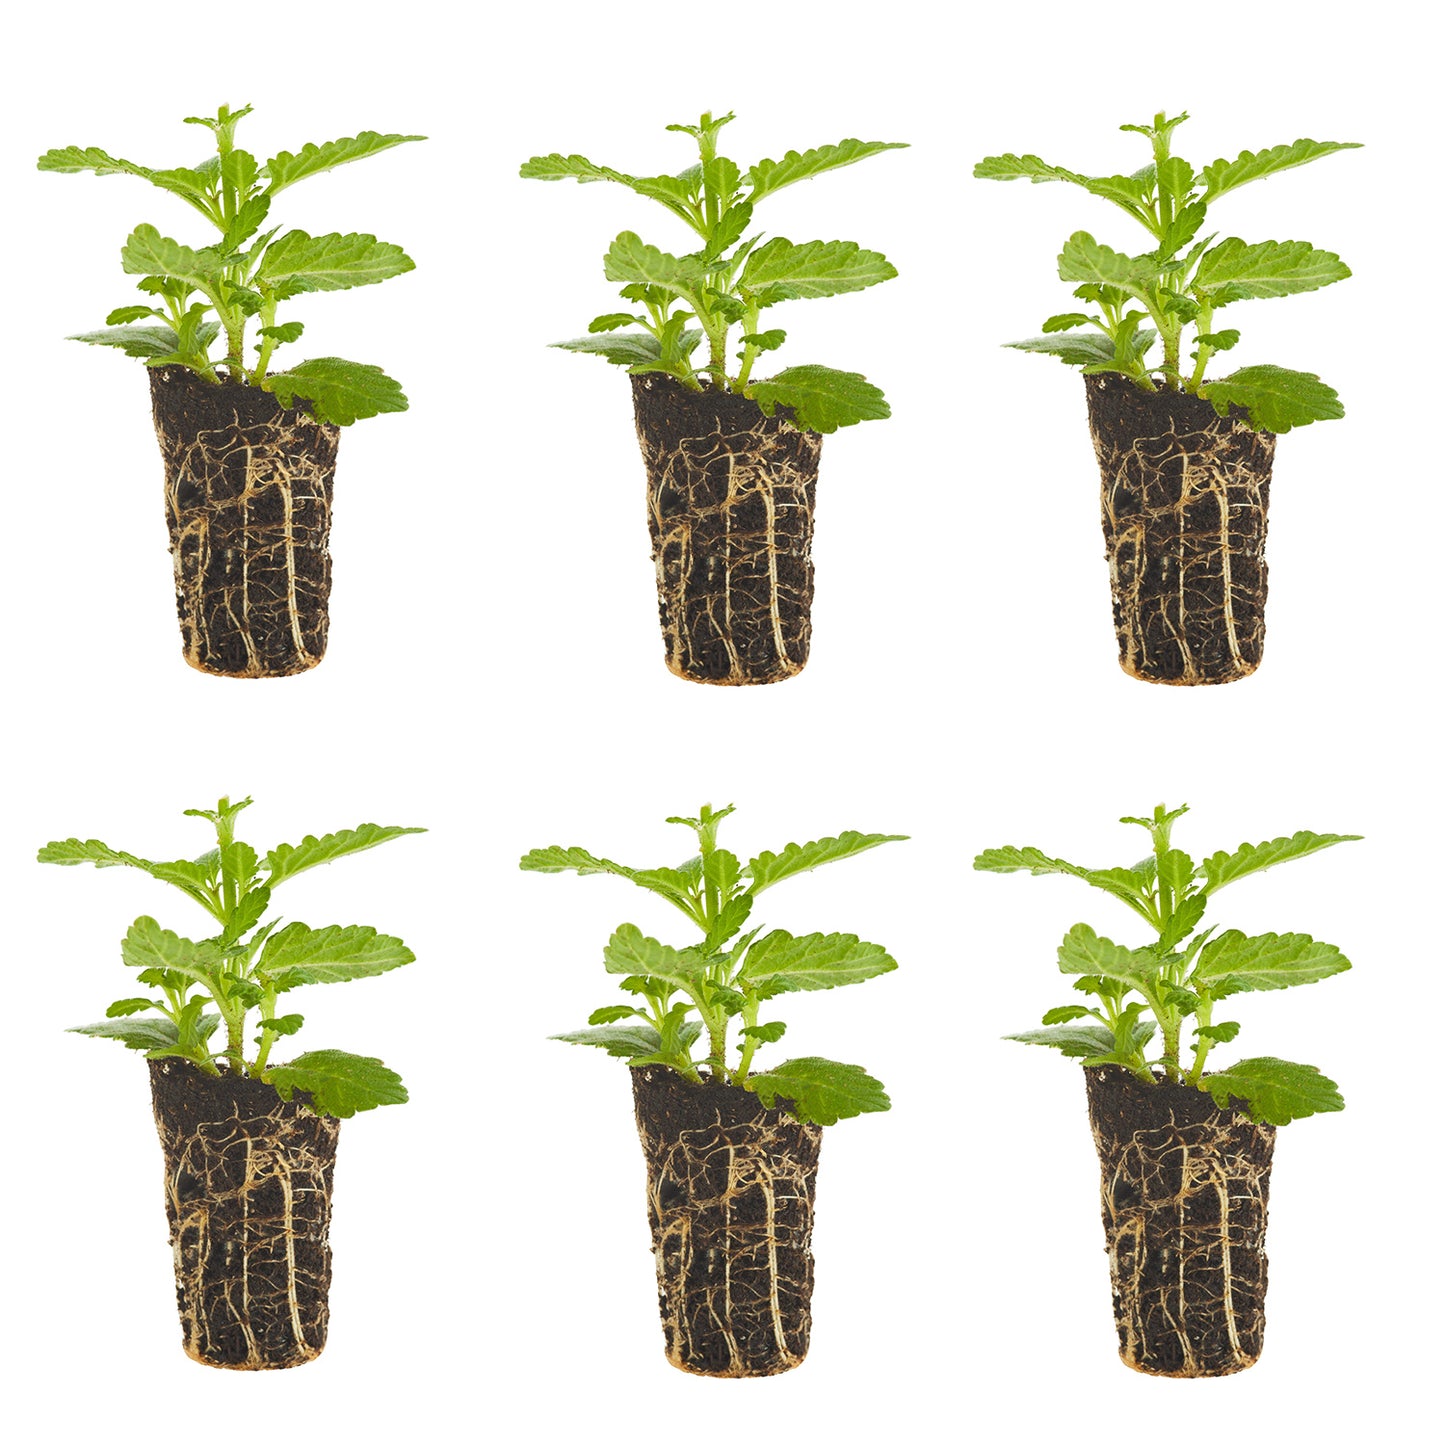 Verbena Firehouse Red Plantlings Live Baby Plants 1-3in., 6-Pack